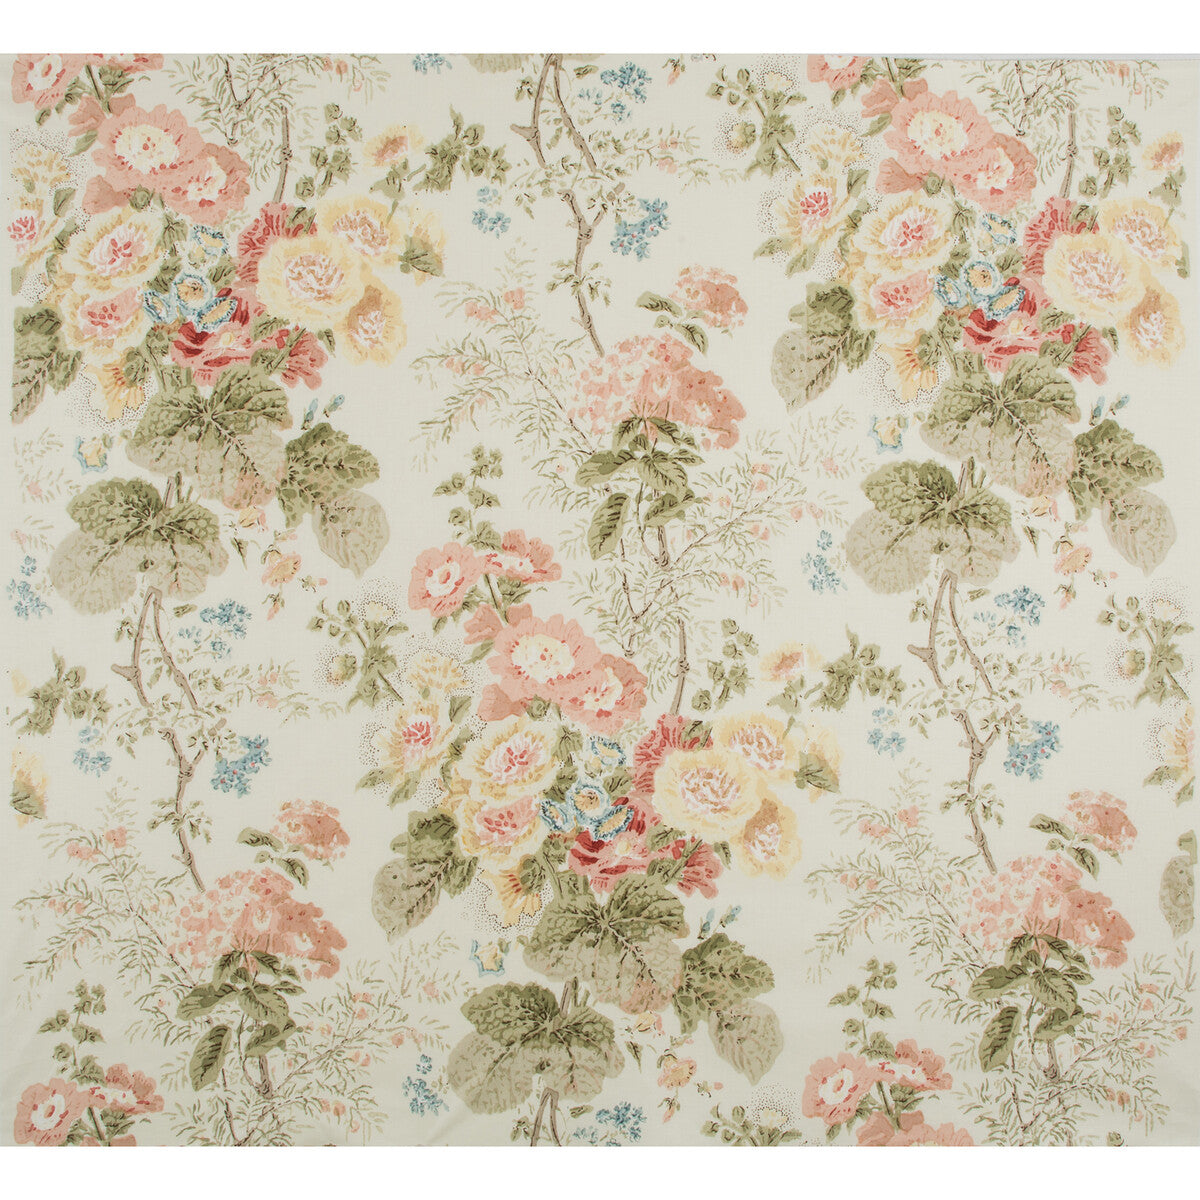 Hollyhock Hdb fabric in coral/olive color - pattern 2005100.730.0 - by Lee Jofa